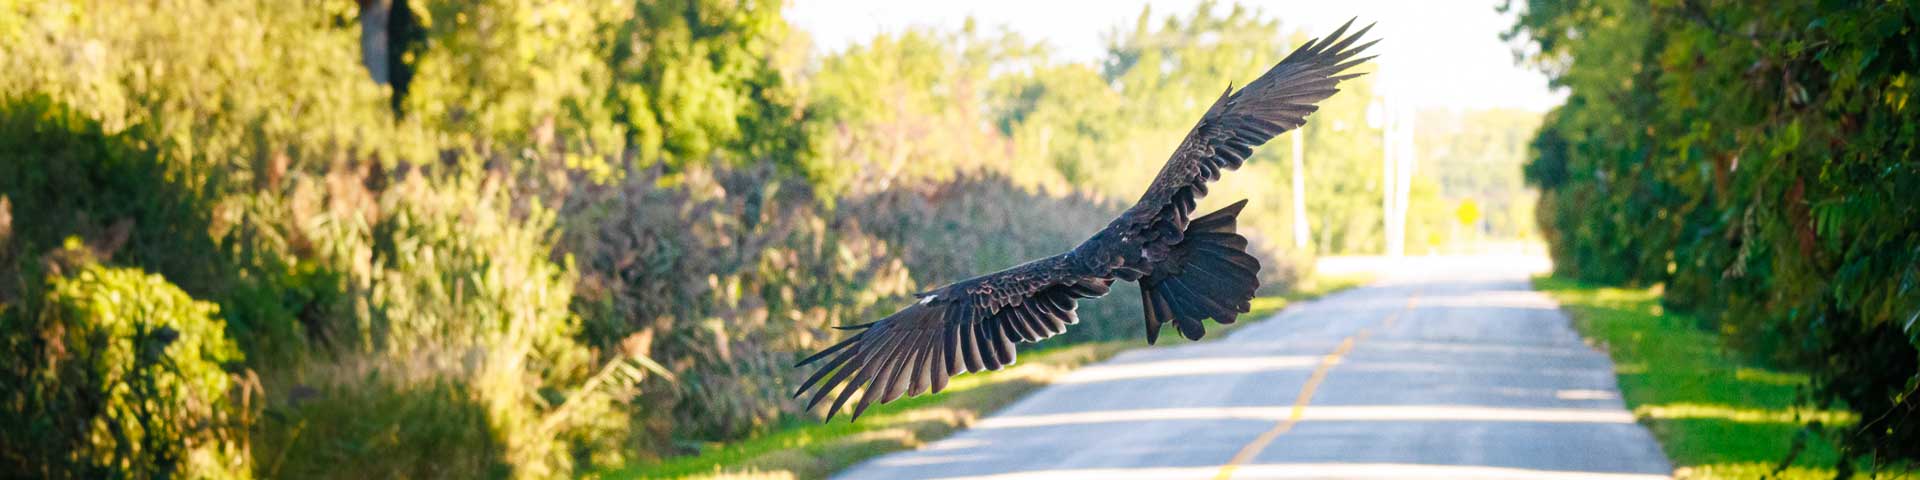 Turkey vulture flying over a road